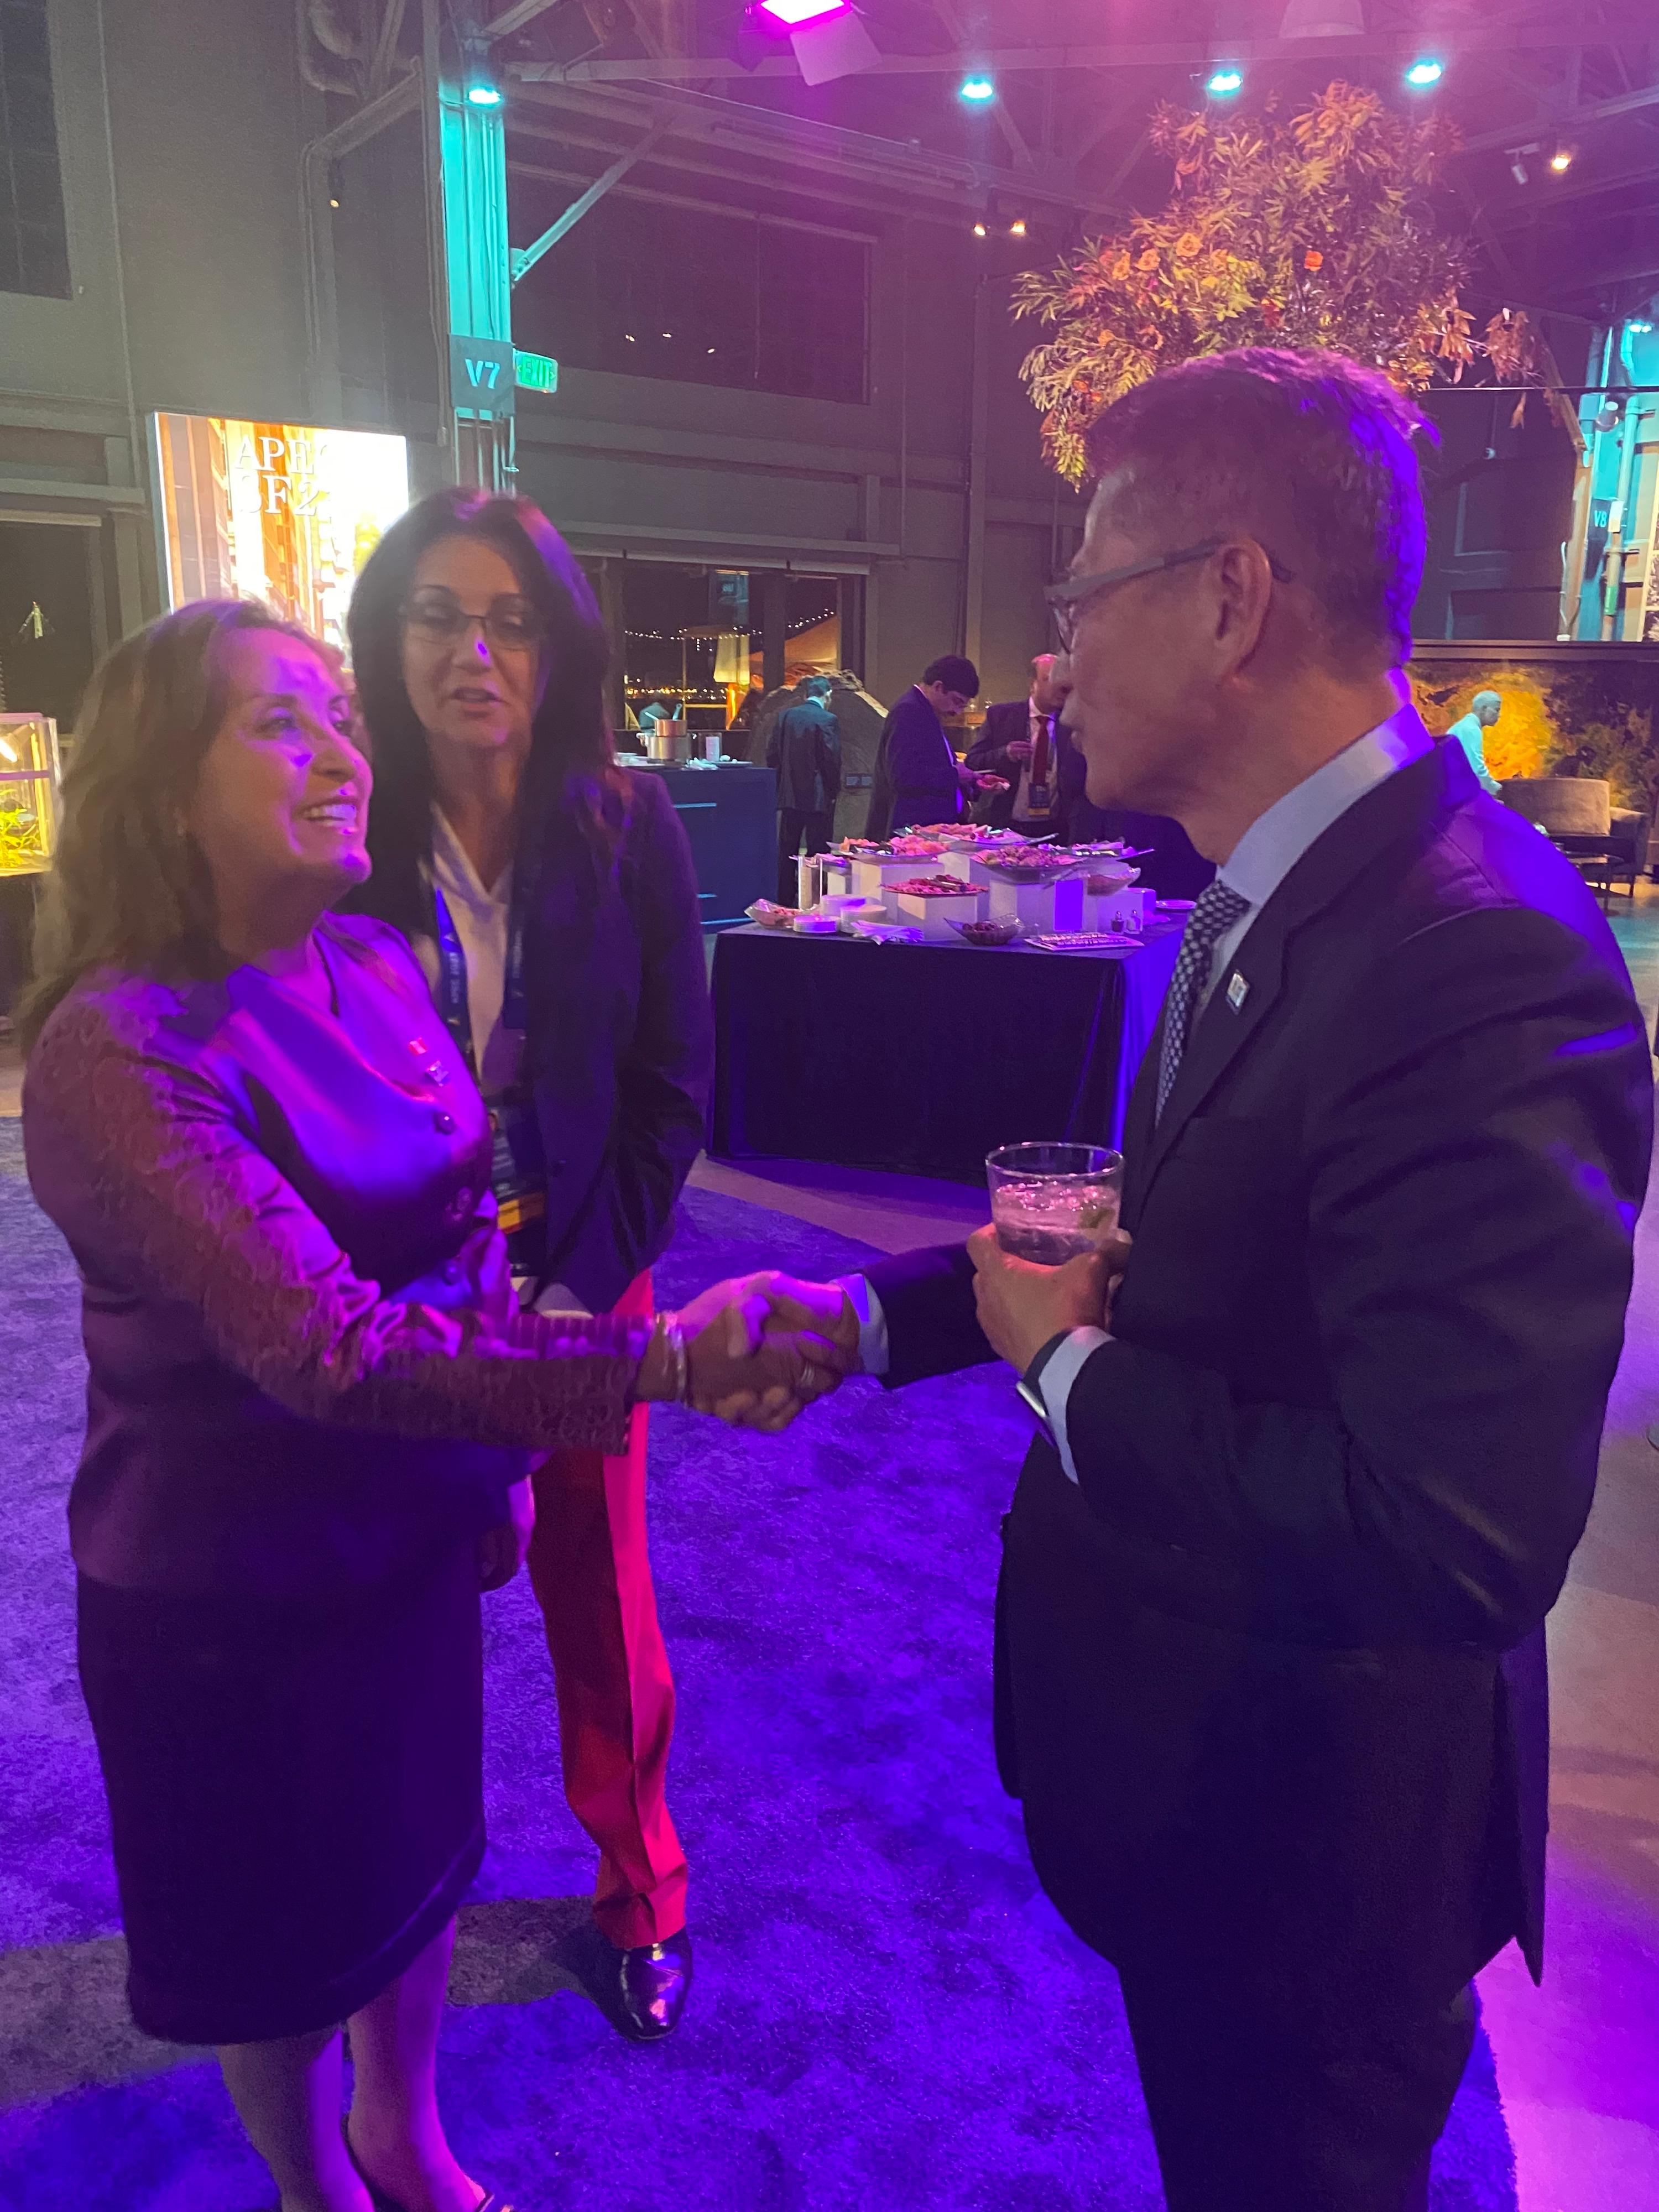 The Financial Secretary, Mr Paul Chan, attended the Asia-Pacific Economic Cooperation Economic Leaders' Meeting welcome reception and cultural performance in San Francisco, the United States, yesterday evening (November 15, San Francisco time). Photo shows Mr Chan (right) chatting with the President of Peru, Ms Dina Boluarte (left), at the welcome reception.